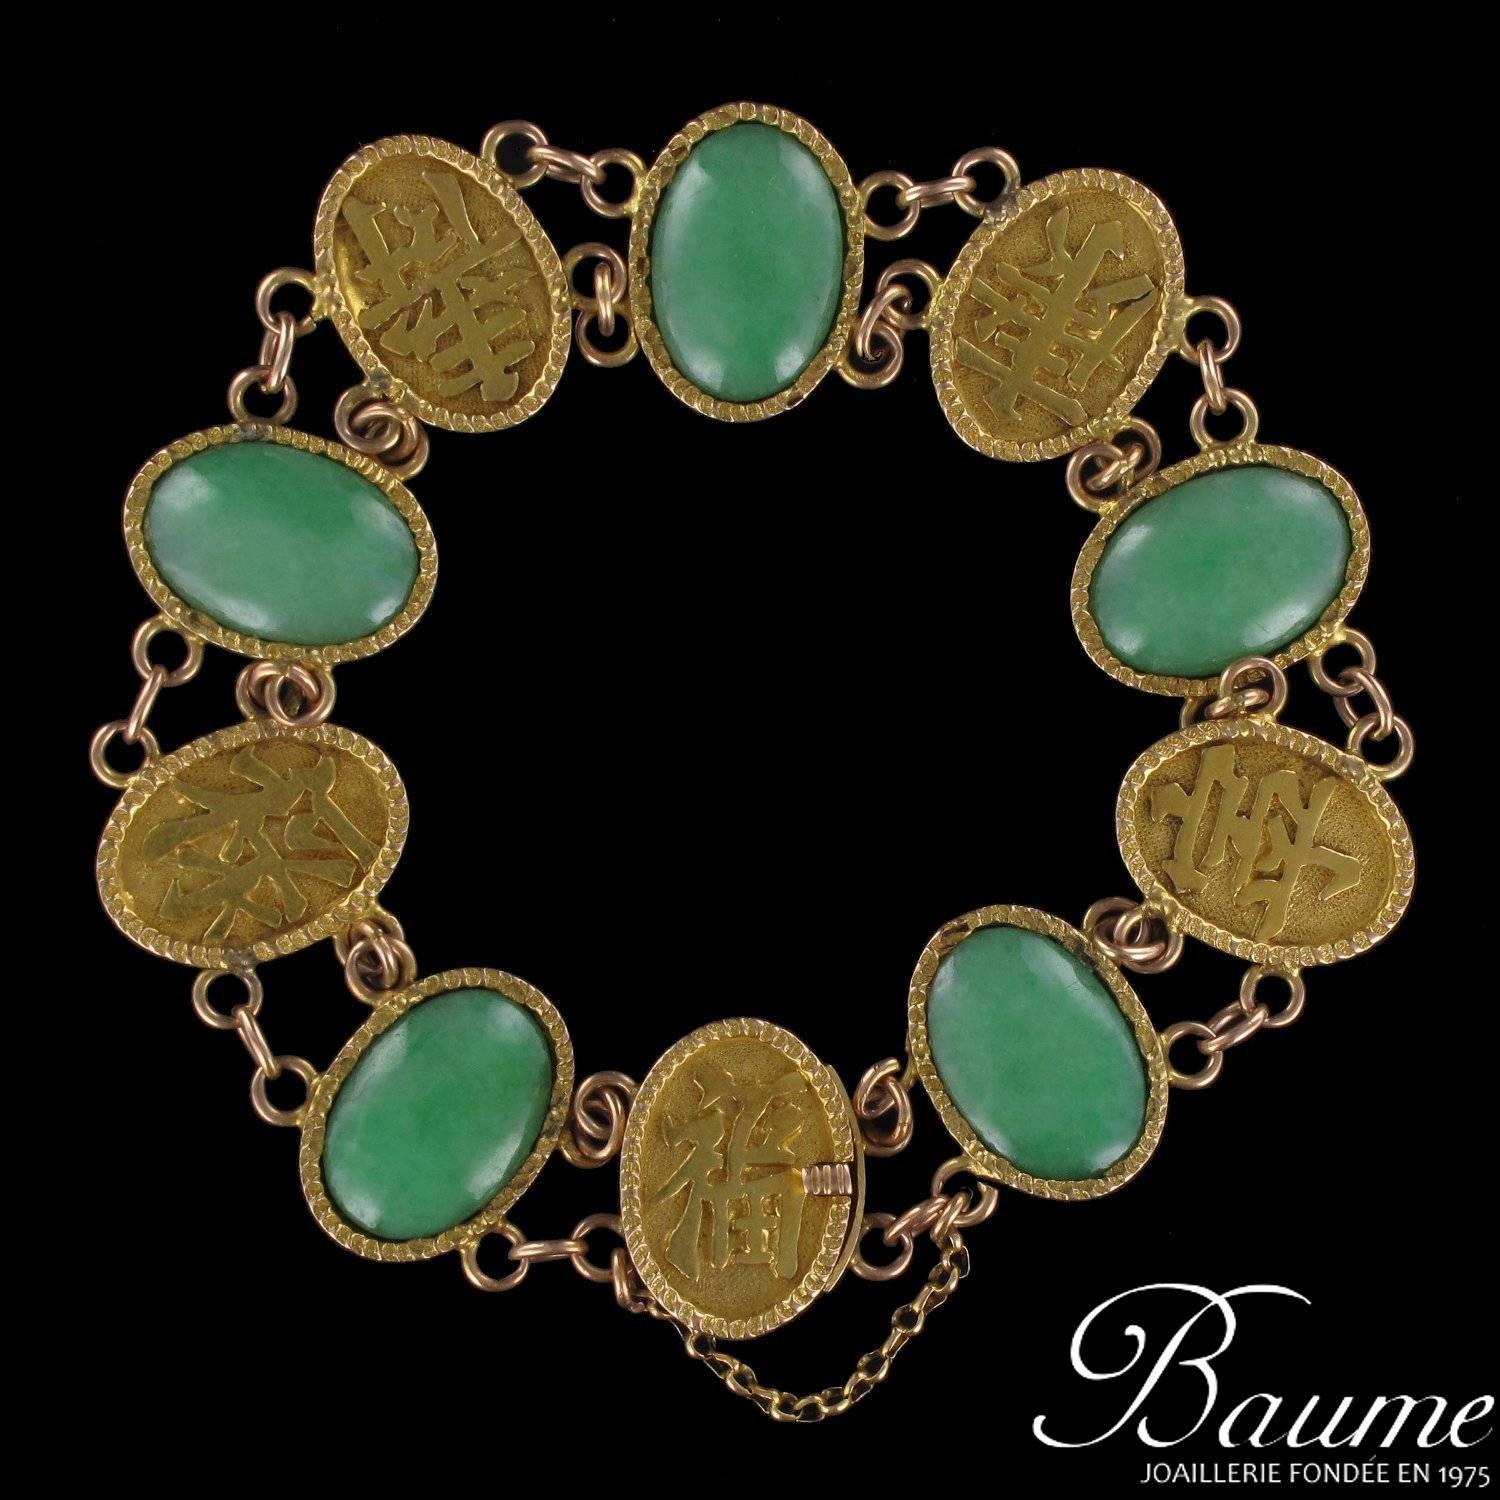 Bracelet in 18 karat yellow gold.
This splendid antique gold bracelet is composed of 5 bezel set oval green jade cabochons and 5 embossed calligraphic motifs on matt backgrounds of the same design. These are linked together with 2 chains. This jade